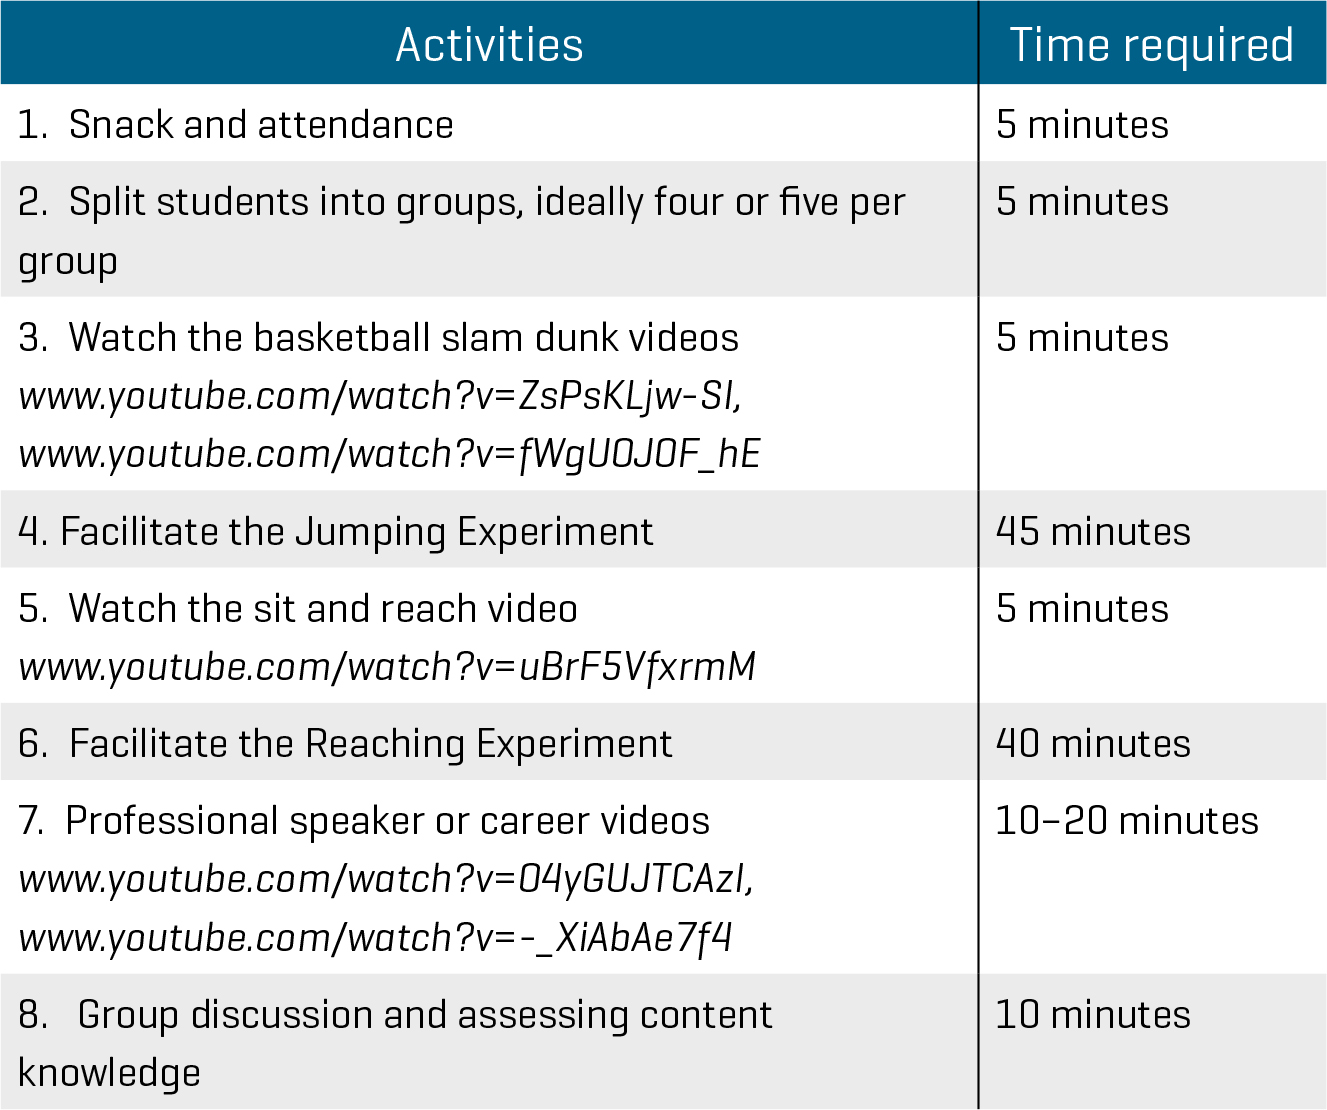 Agenda for the jump and reach activity